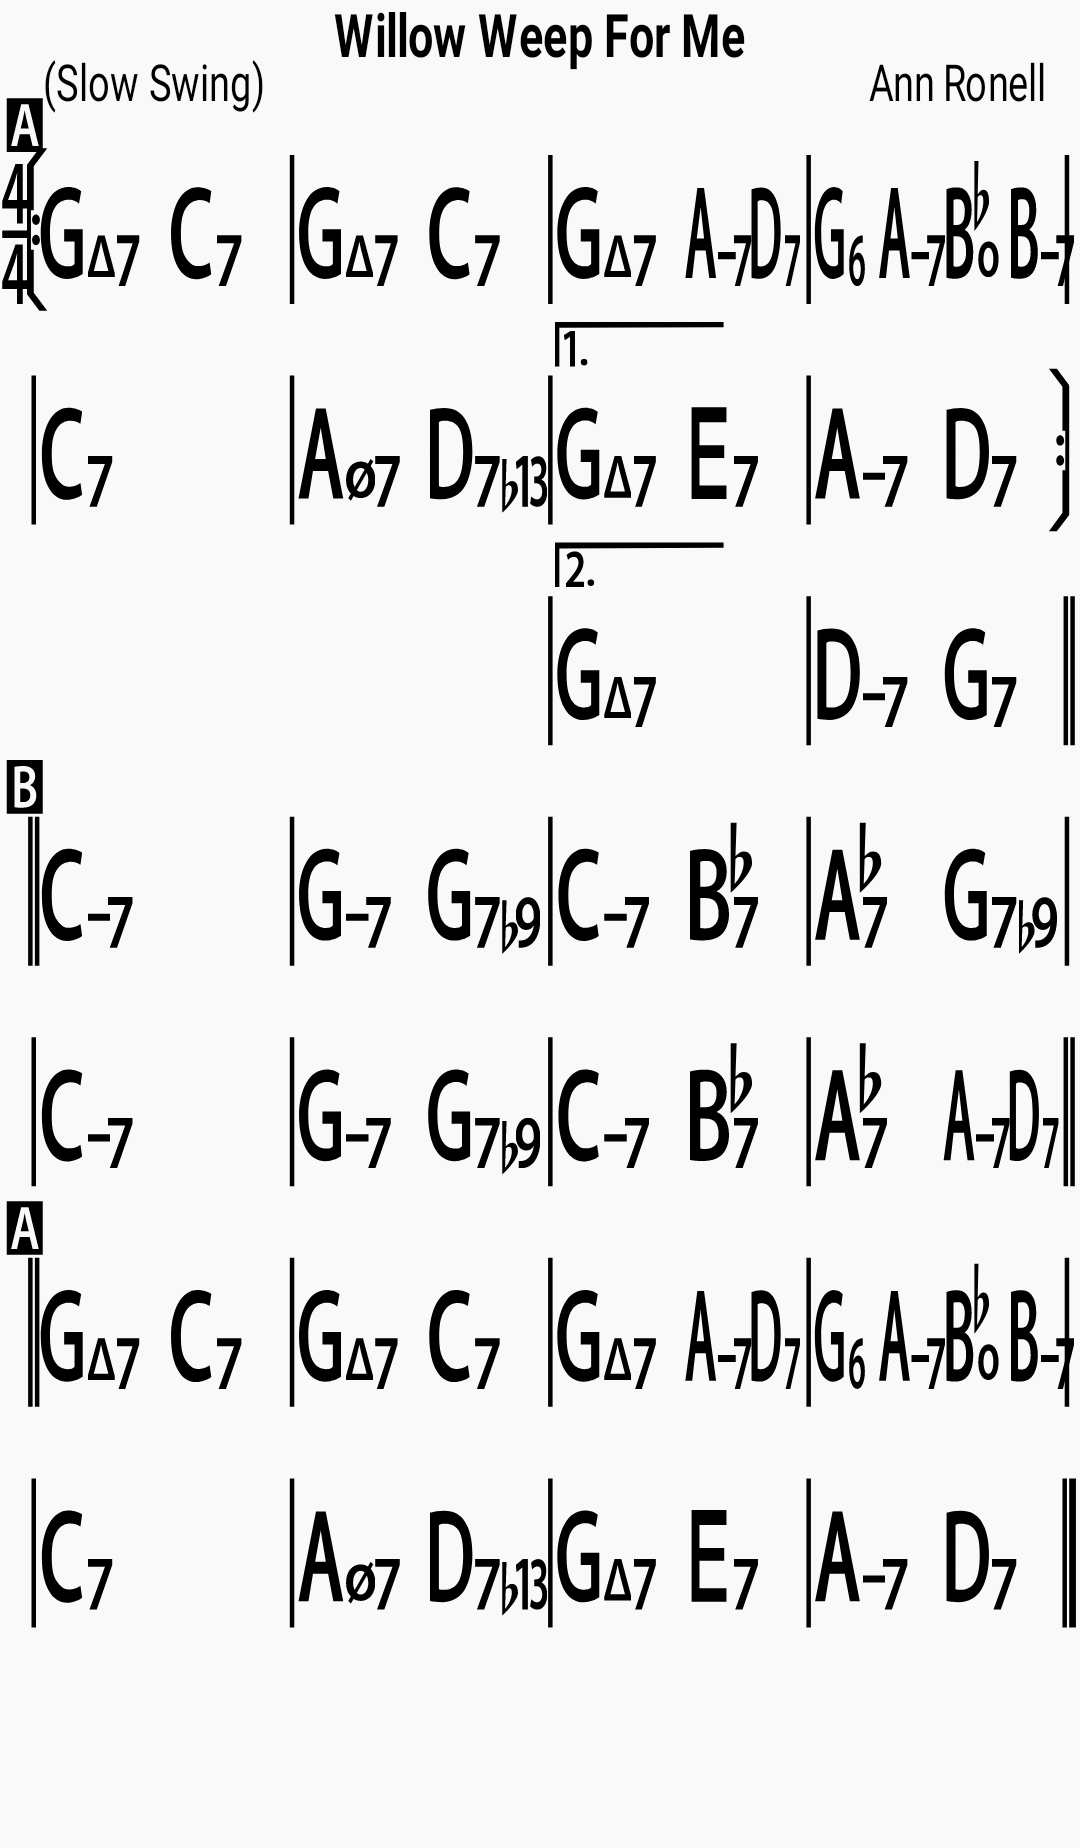 Chord chart for the jazz standard Willow Weep For Me